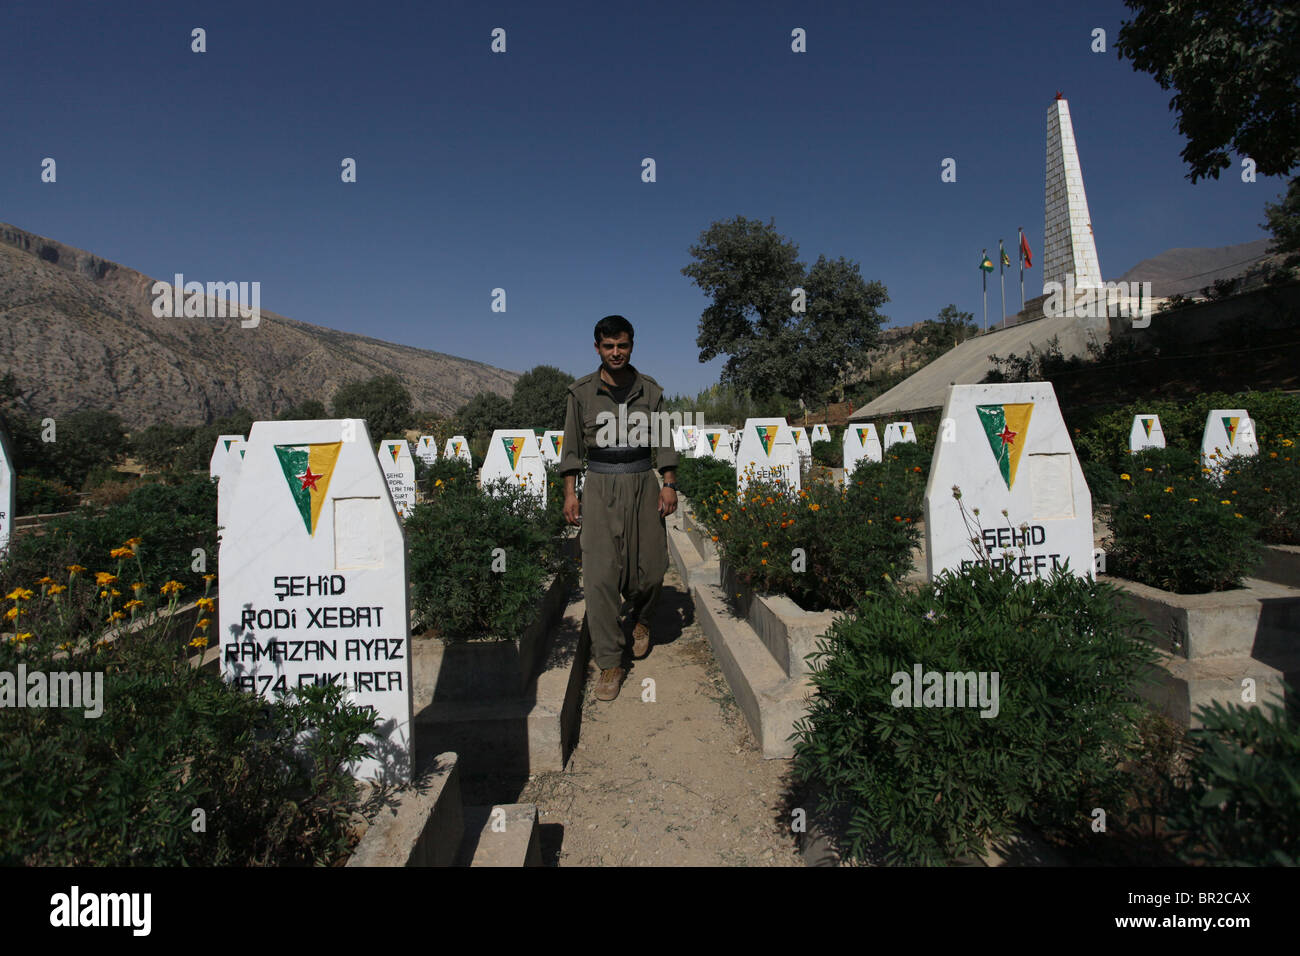 A HPG Kurdish fighter amid tombstones in Mehmet Karasungur Cemetery which is burial site for fallen Kurdish fighters of the People's Defense Forces HPG the military wing of the Kurdistan Workers' Party PKK located in the Qandil Mountains a mountainous area of Iraqi Kurdistan near the Iraq Iran border Stock Photo